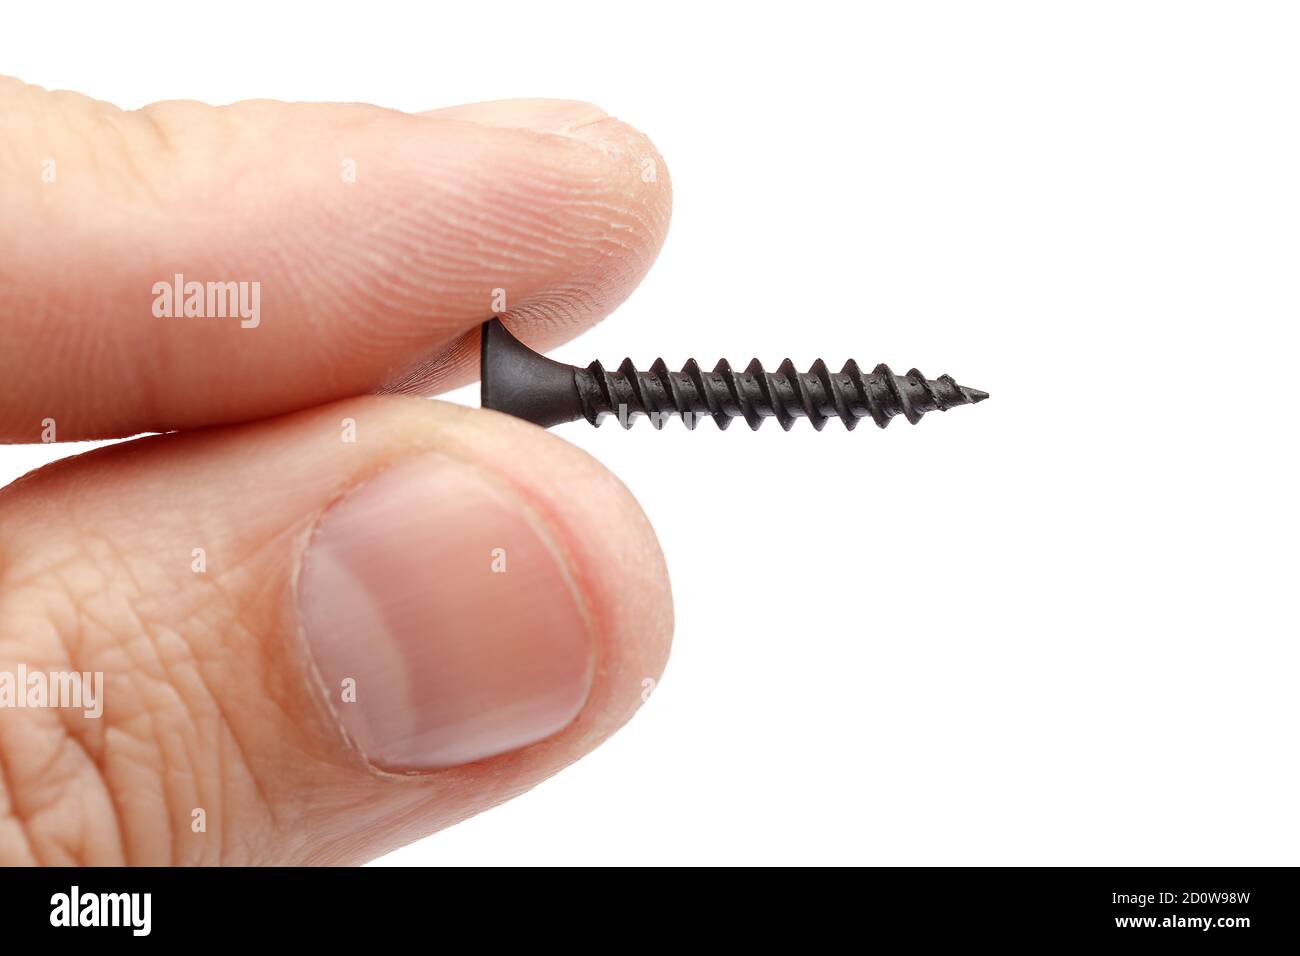 A metal self-tapping screw in the hand, isolated on a white background. Stock Photo